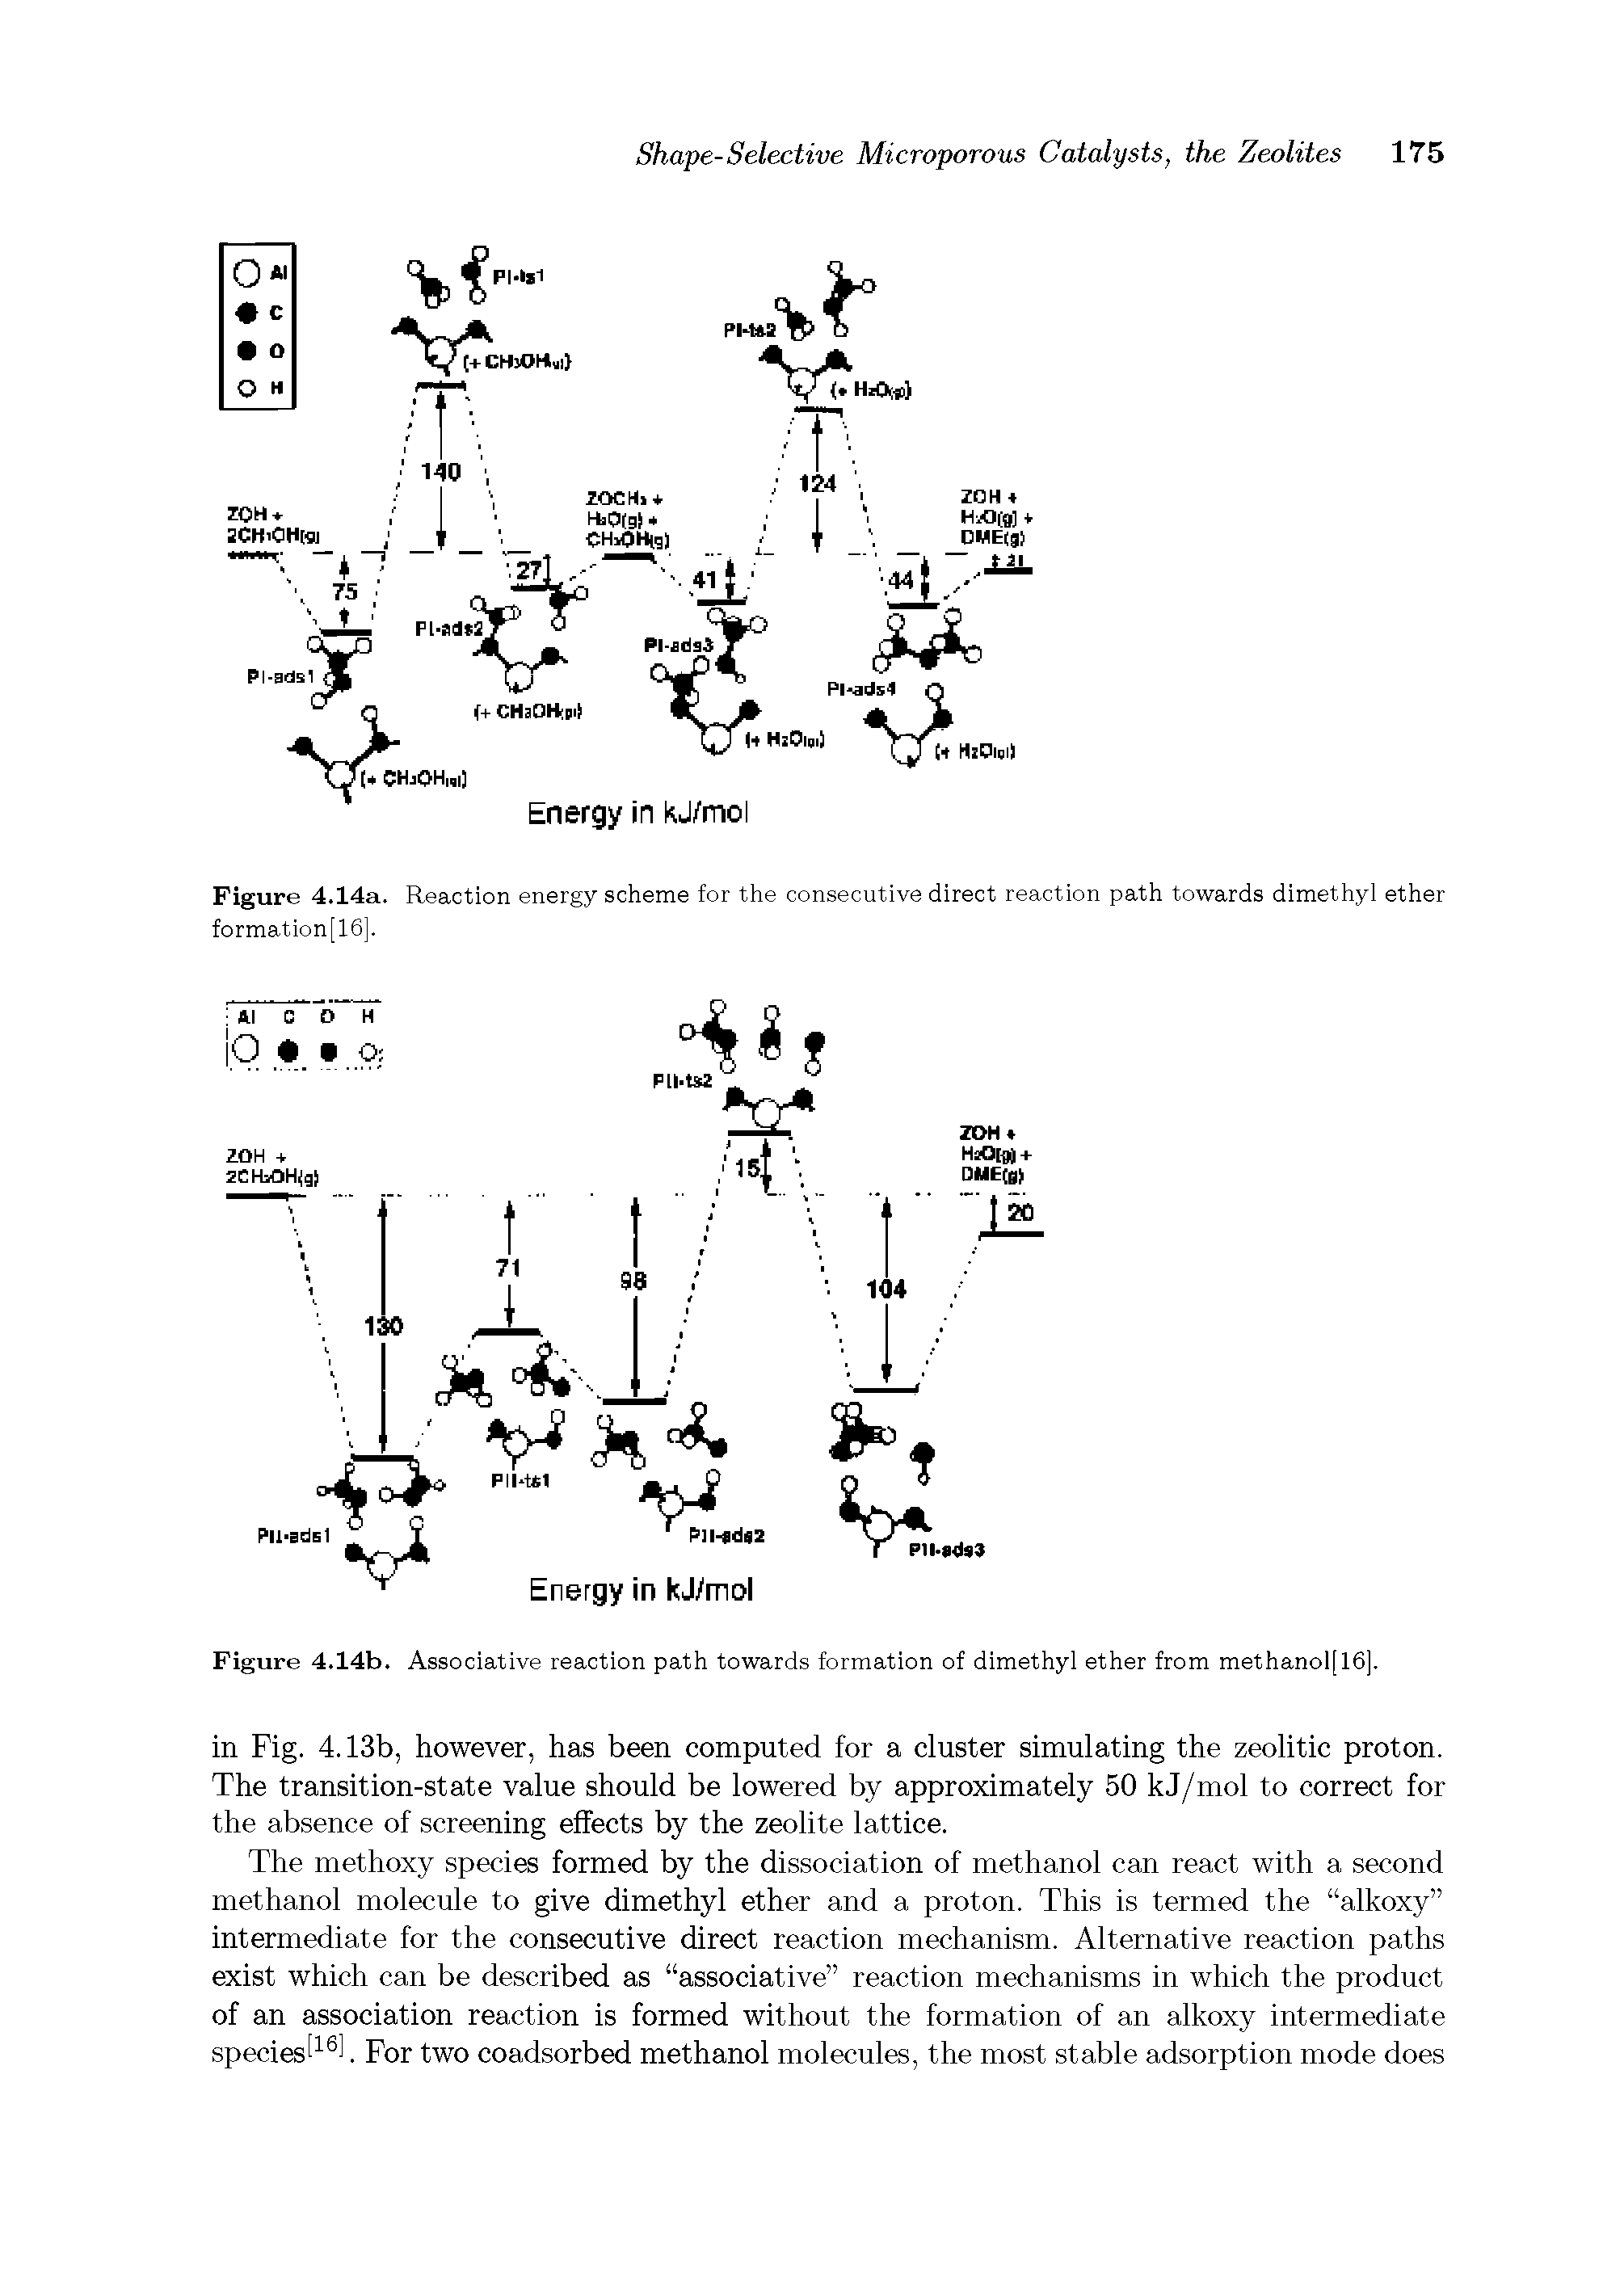 Figure 4.14b. Associative reaction path towards formation of dimethyl ether from methanol 16. ...